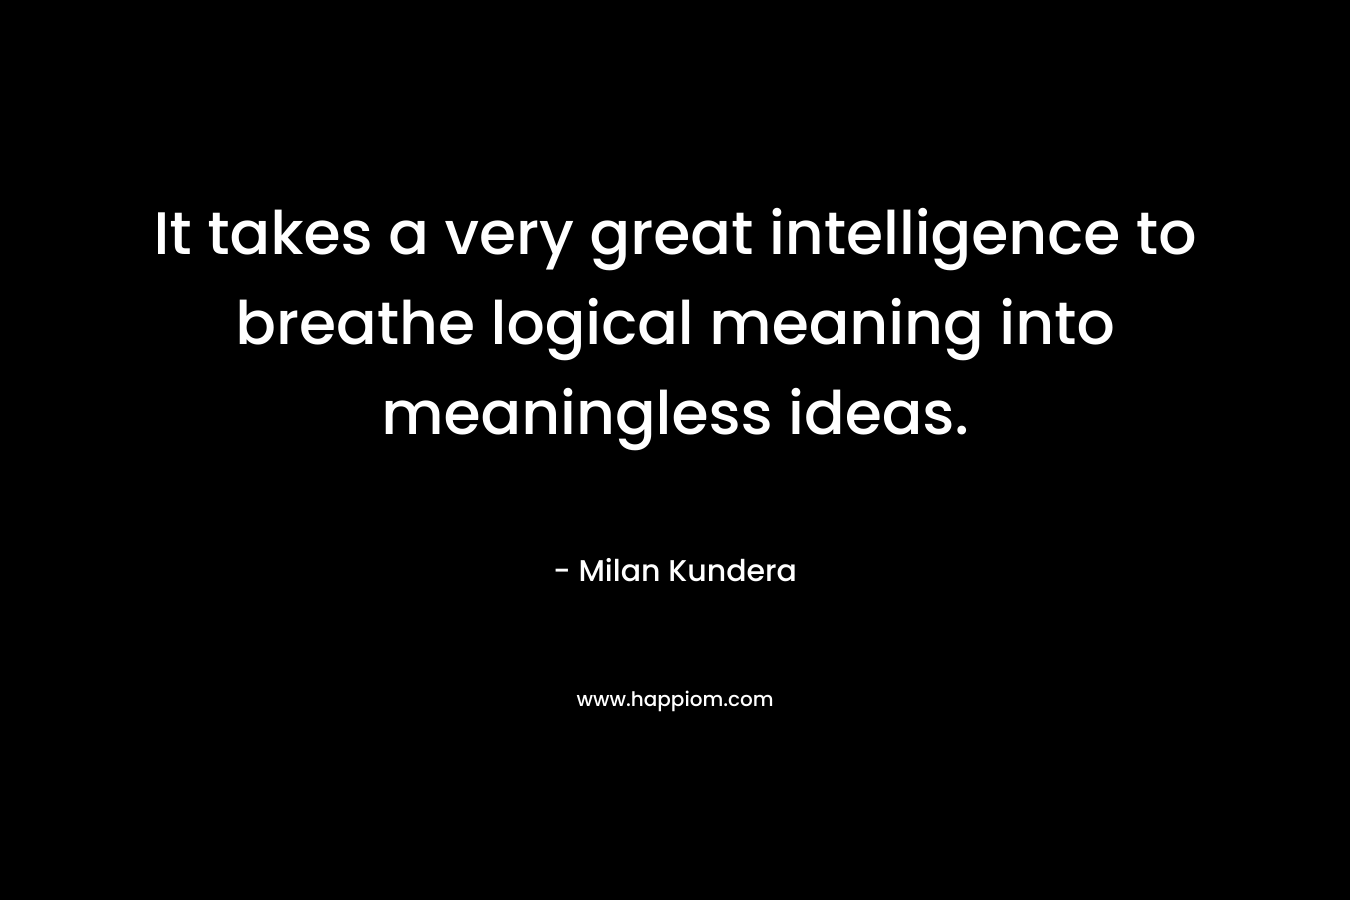 It takes a very great intelligence to breathe logical meaning into meaningless ideas.